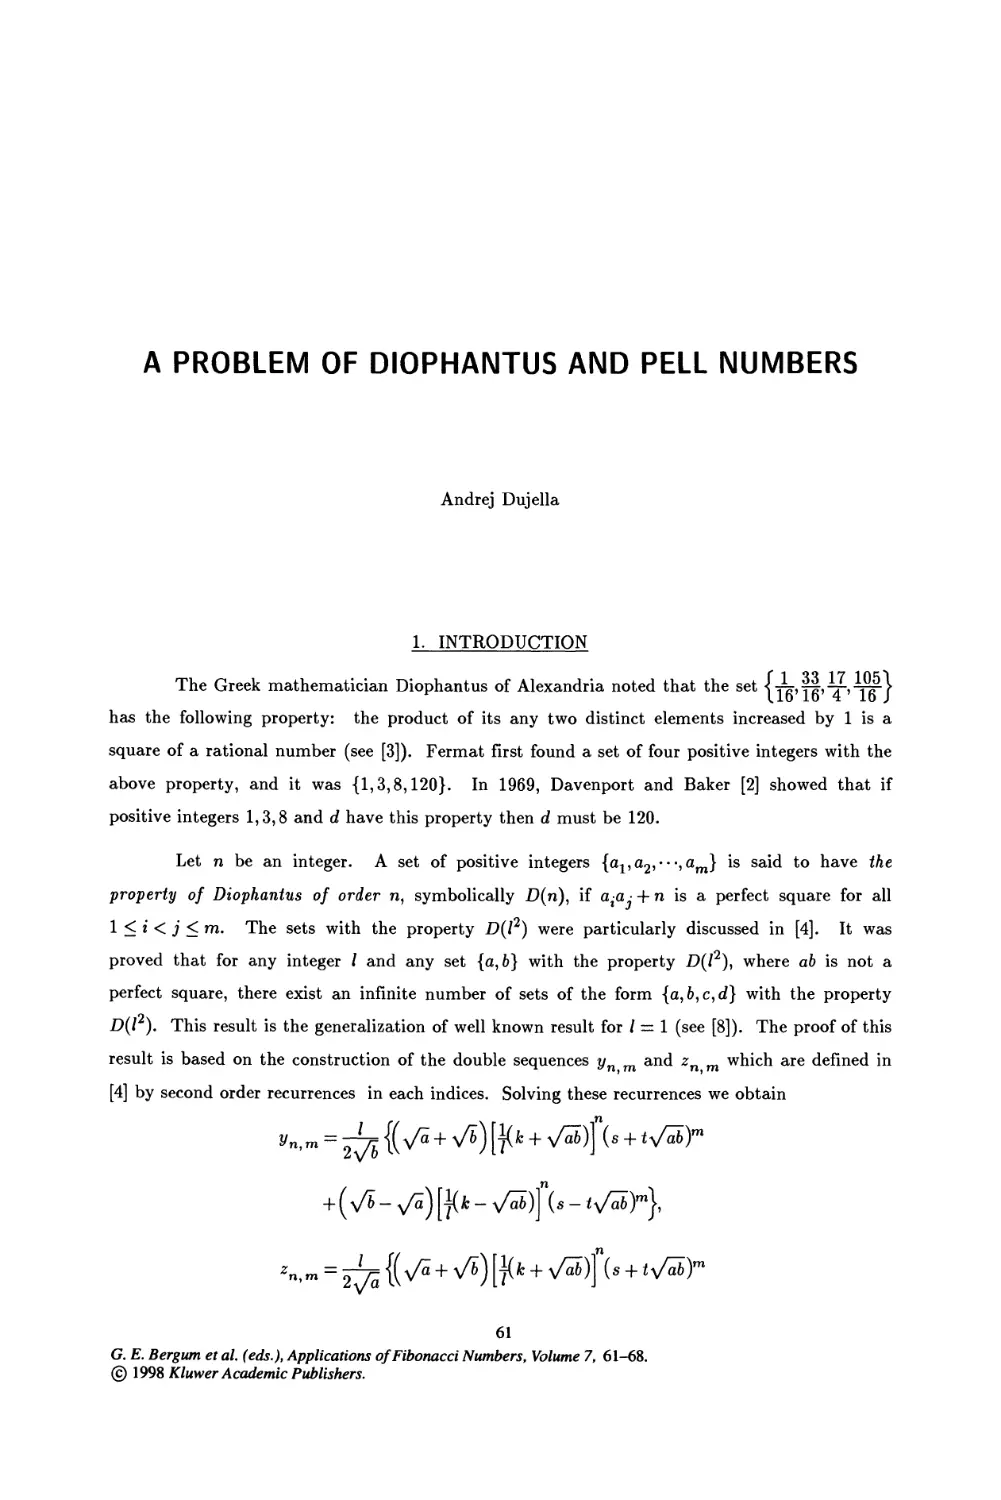 9. A Problem of Diophantus and Pell Numbers